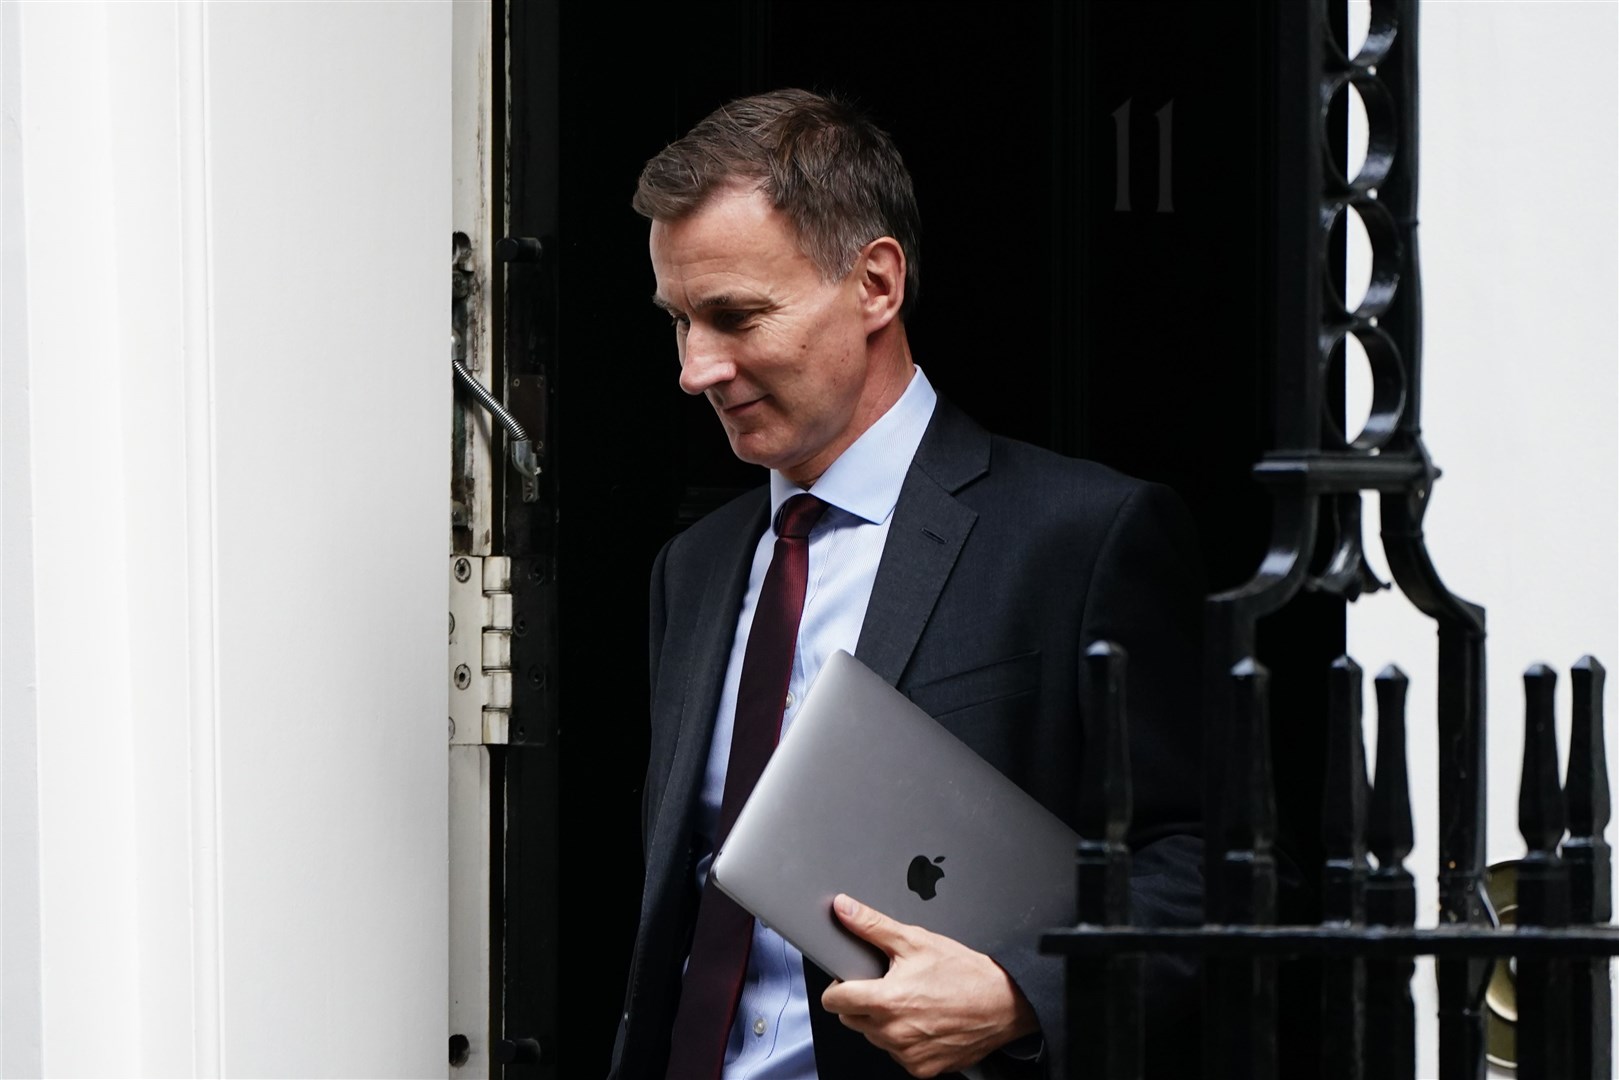 Chancellor Jeremy Hunt accused Sir Keir Starmer of plotting to ‘unpick’ Brexit (Aaron Chown/PA)